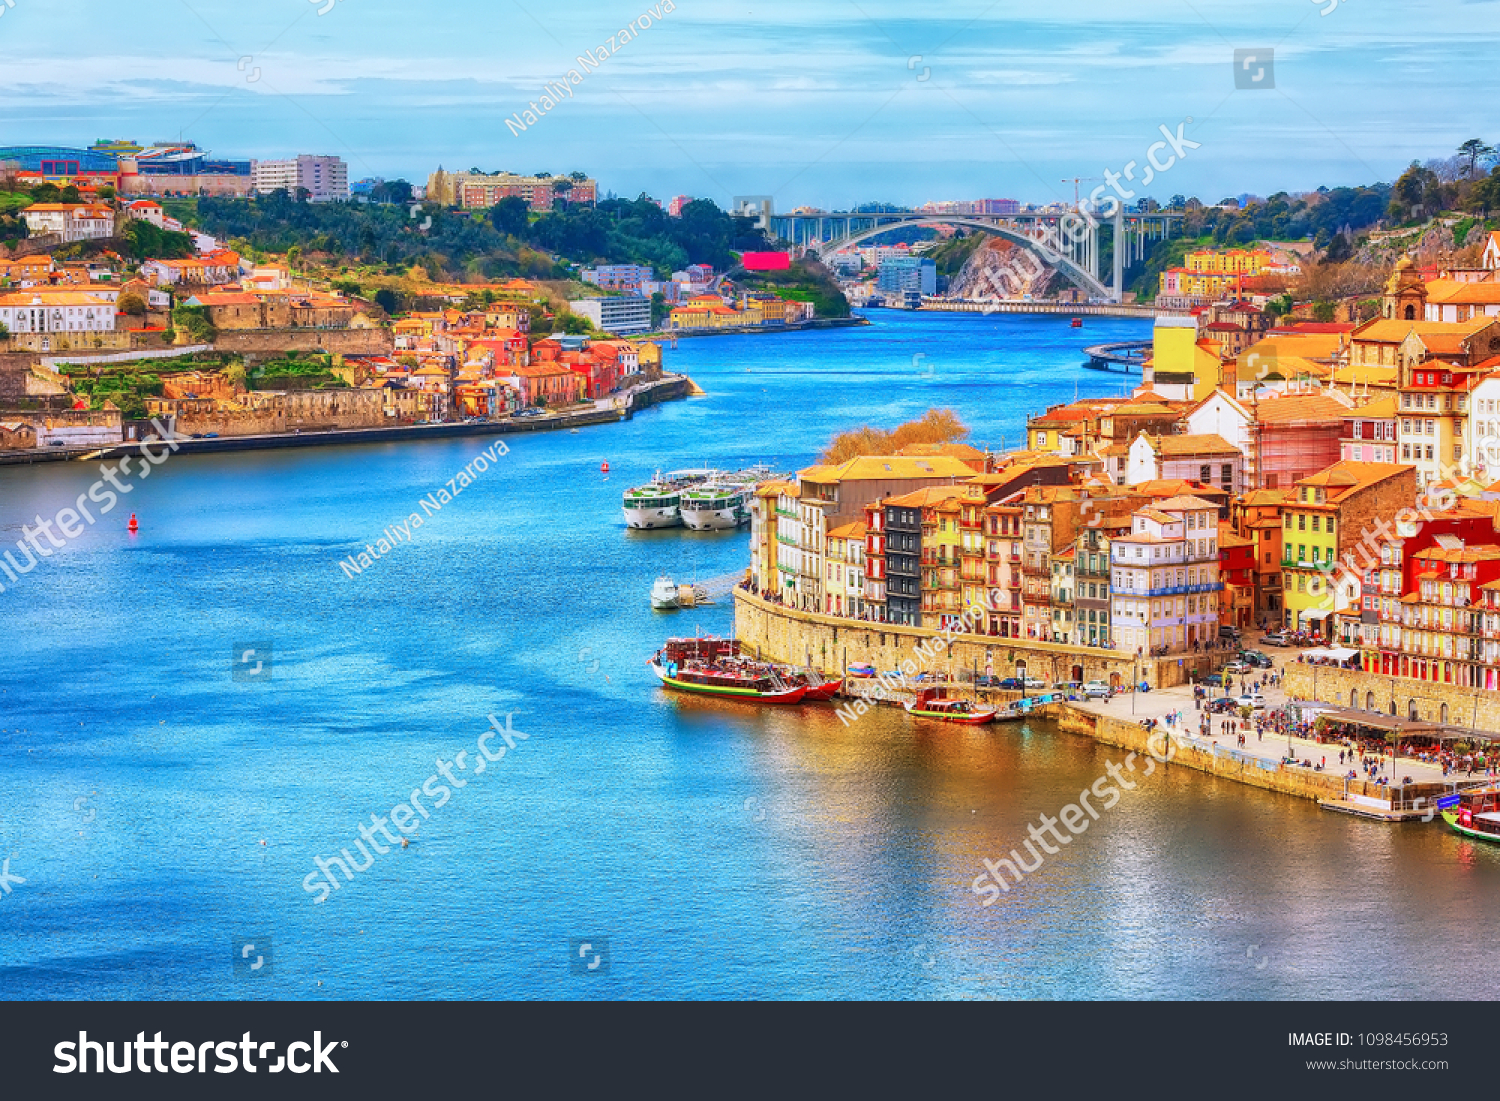 Porto, Portugal old town ribeira aerial promenade view with colorful houses, Douro river and boats #1098456953